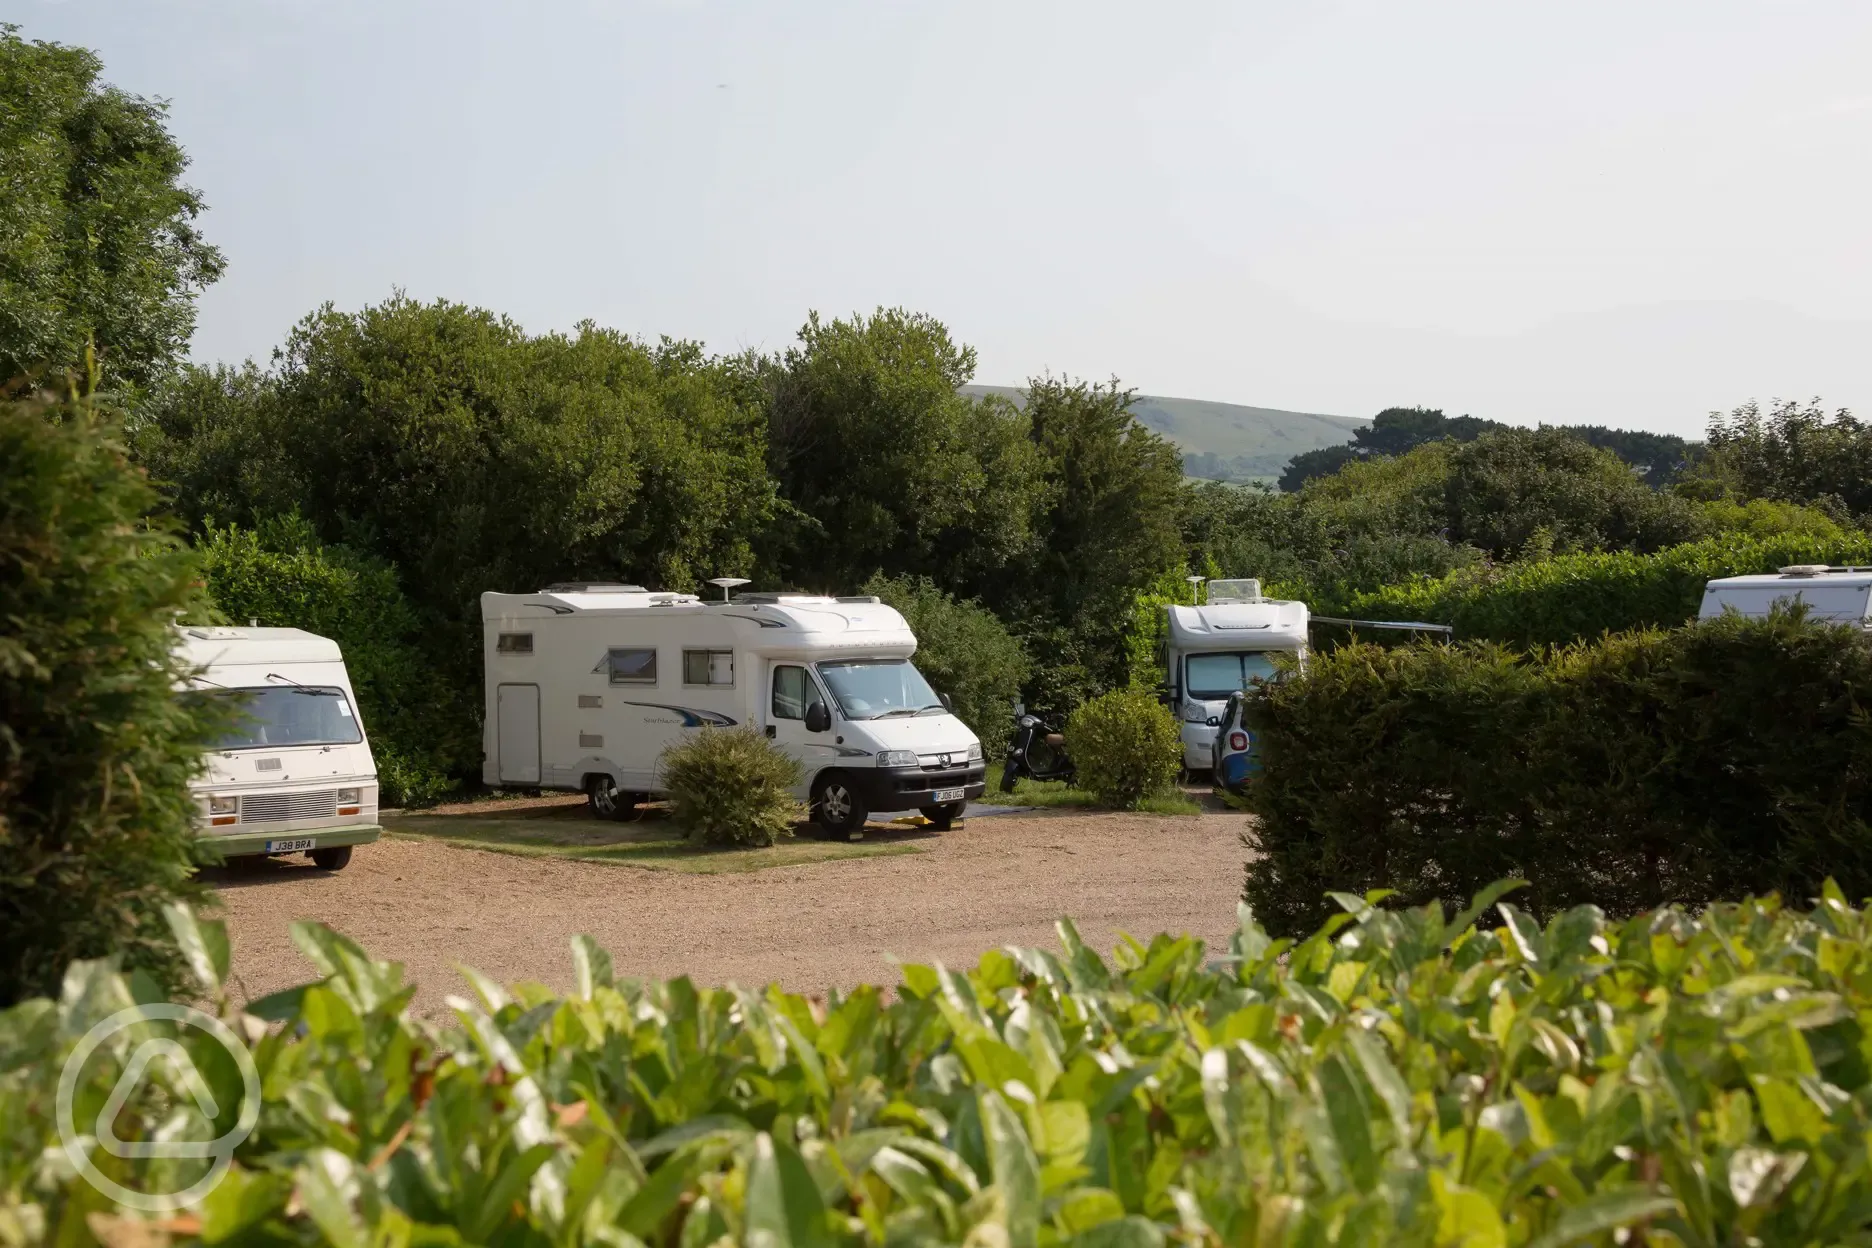 Large fully serviced hardstanding pitches